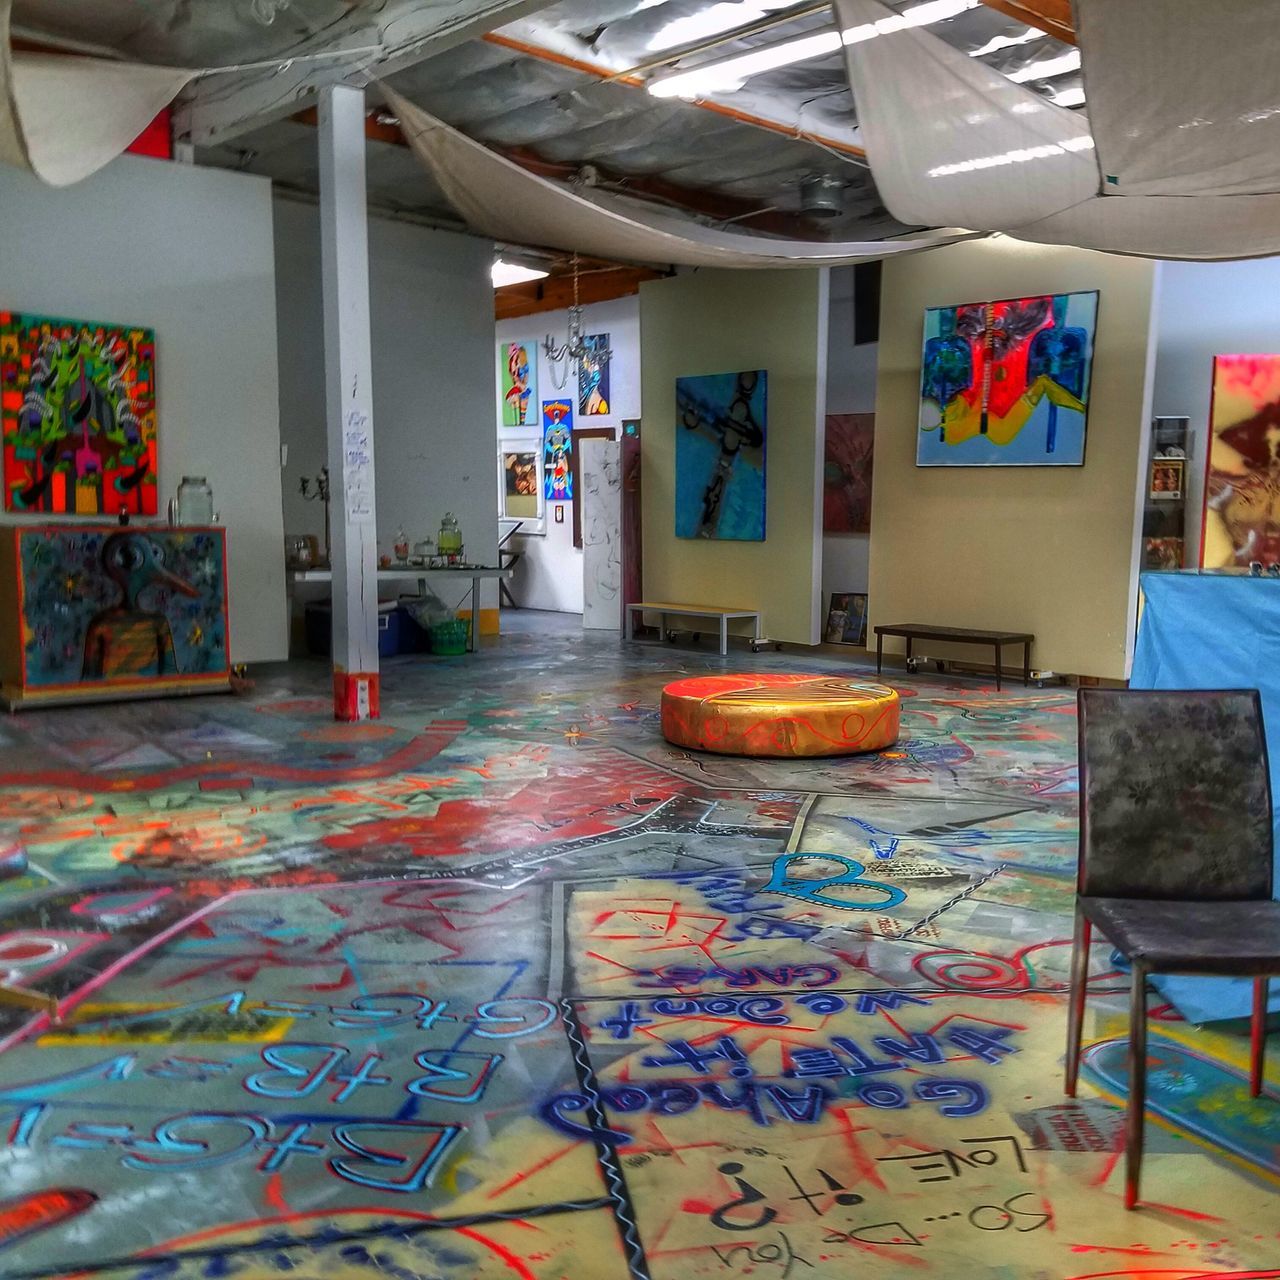 indoors, graffiti, built structure, architecture, empty, absence, multi colored, art and craft, messy, creativity, flooring, art, chair, wall - building feature, interior, no people, door, abandoned, house, day